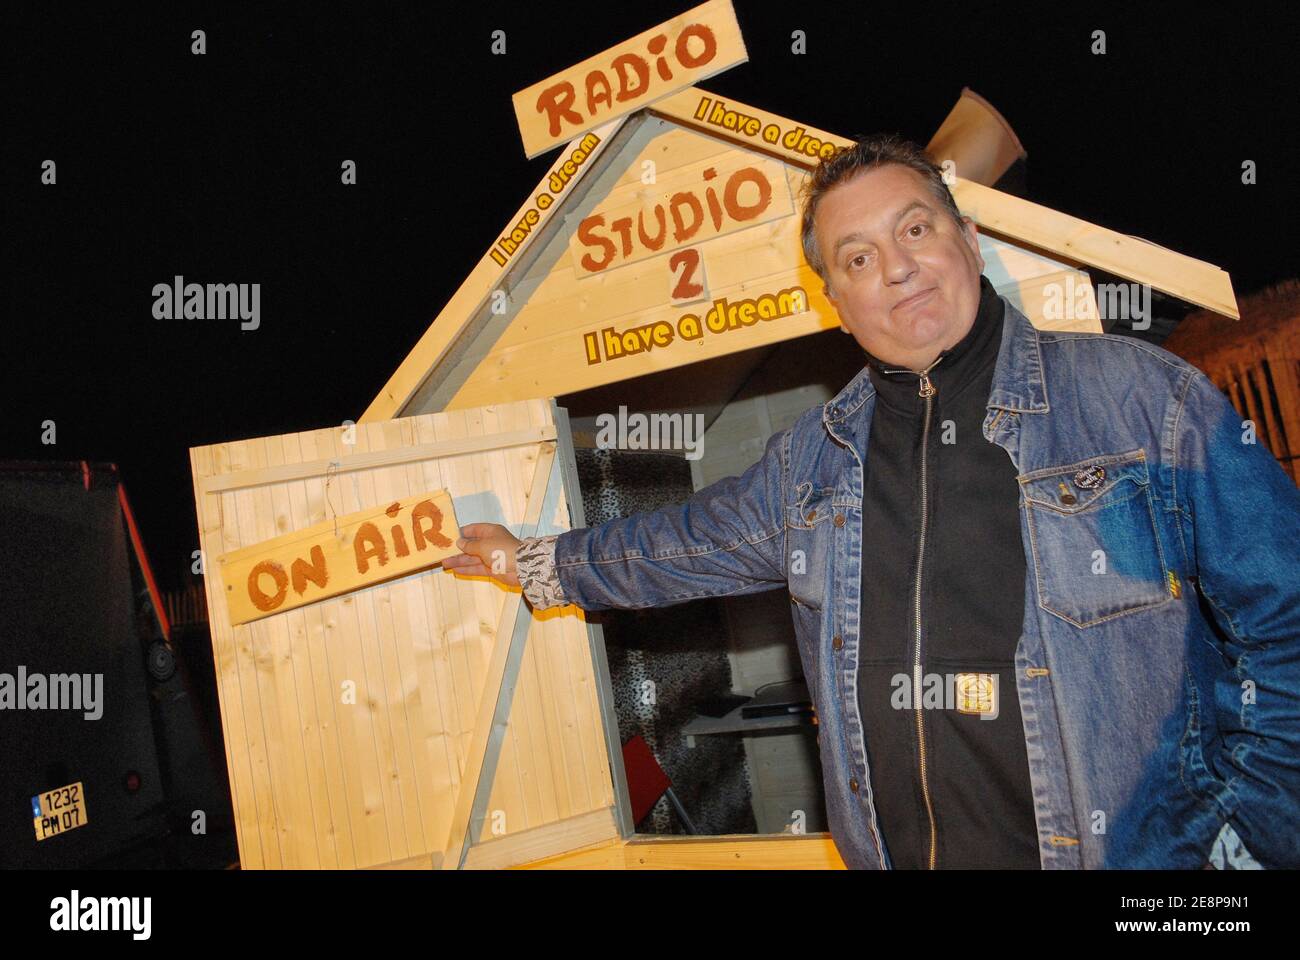 Jules-Edouard Moustic poses next to his radio studio during 3rd Groland's  Film Festival held in Quend, north of France on September 22-23, 2007.  Photo by Ammar Abd Rabbo/ABACAPRESS.COM Stock Photo - Alamy